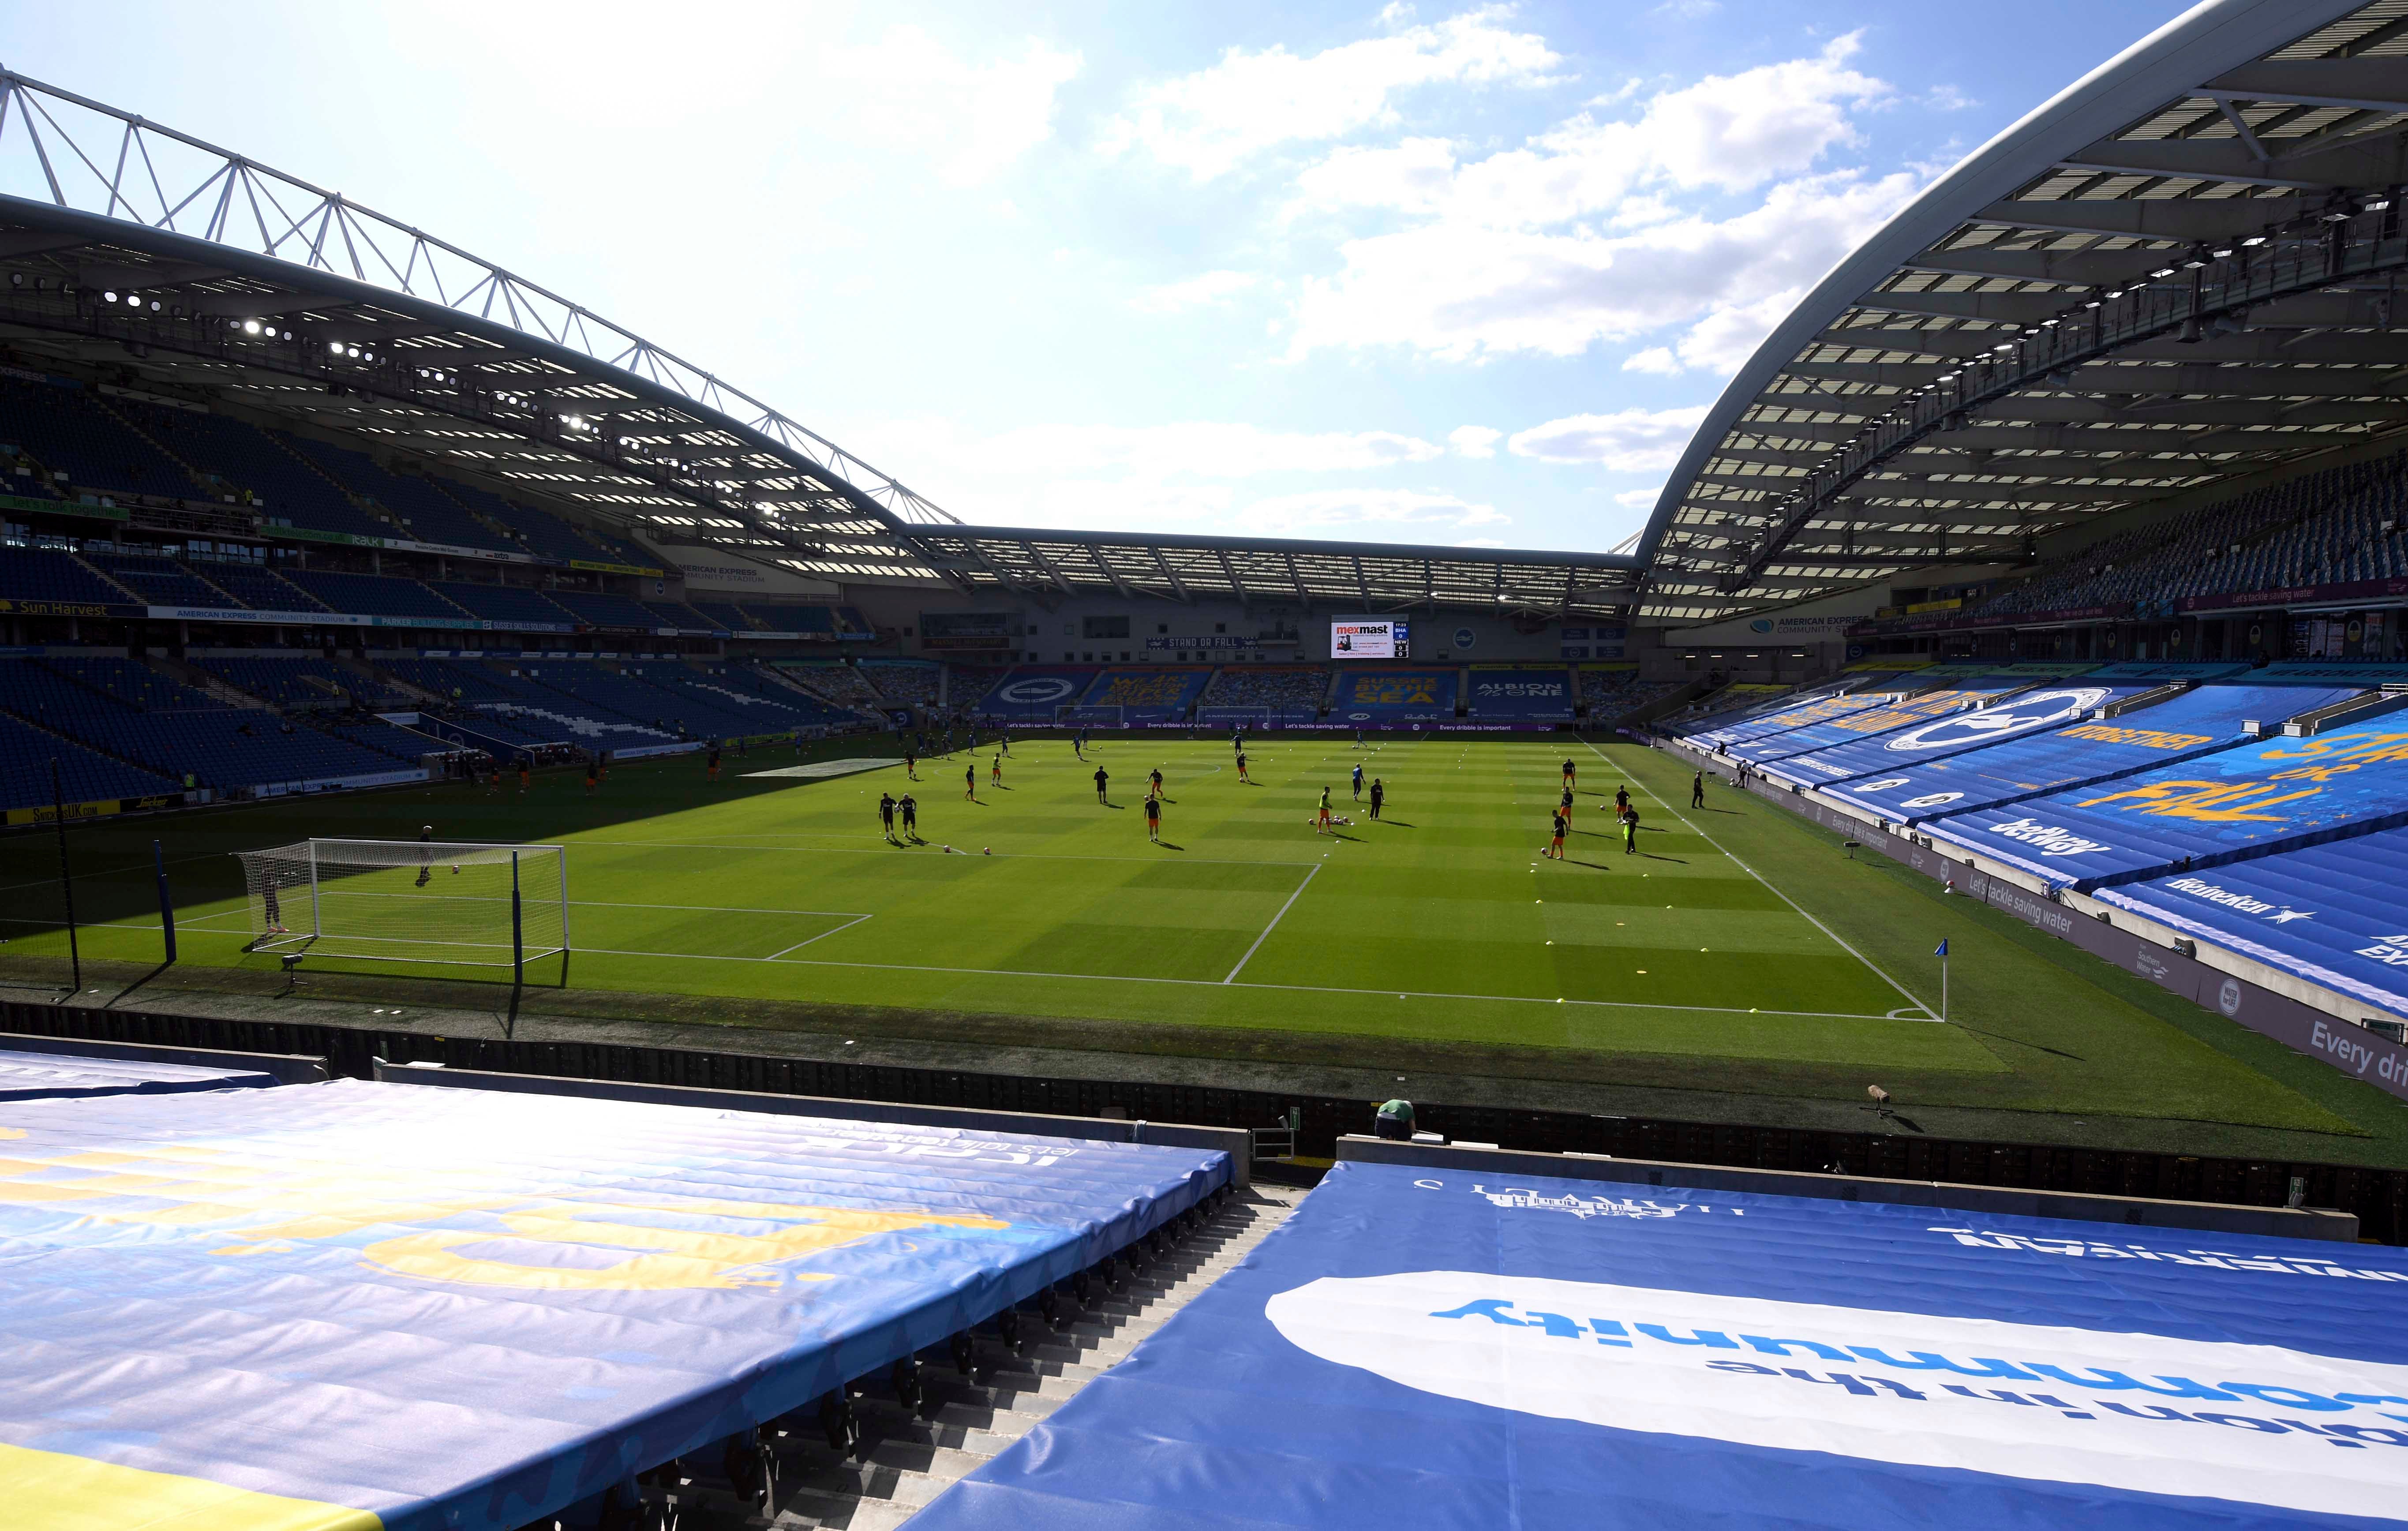 Newcastle United players warm up before the Premier League match at the Amex Stadium, Brighton, United Kingdom on July 20, 2020.